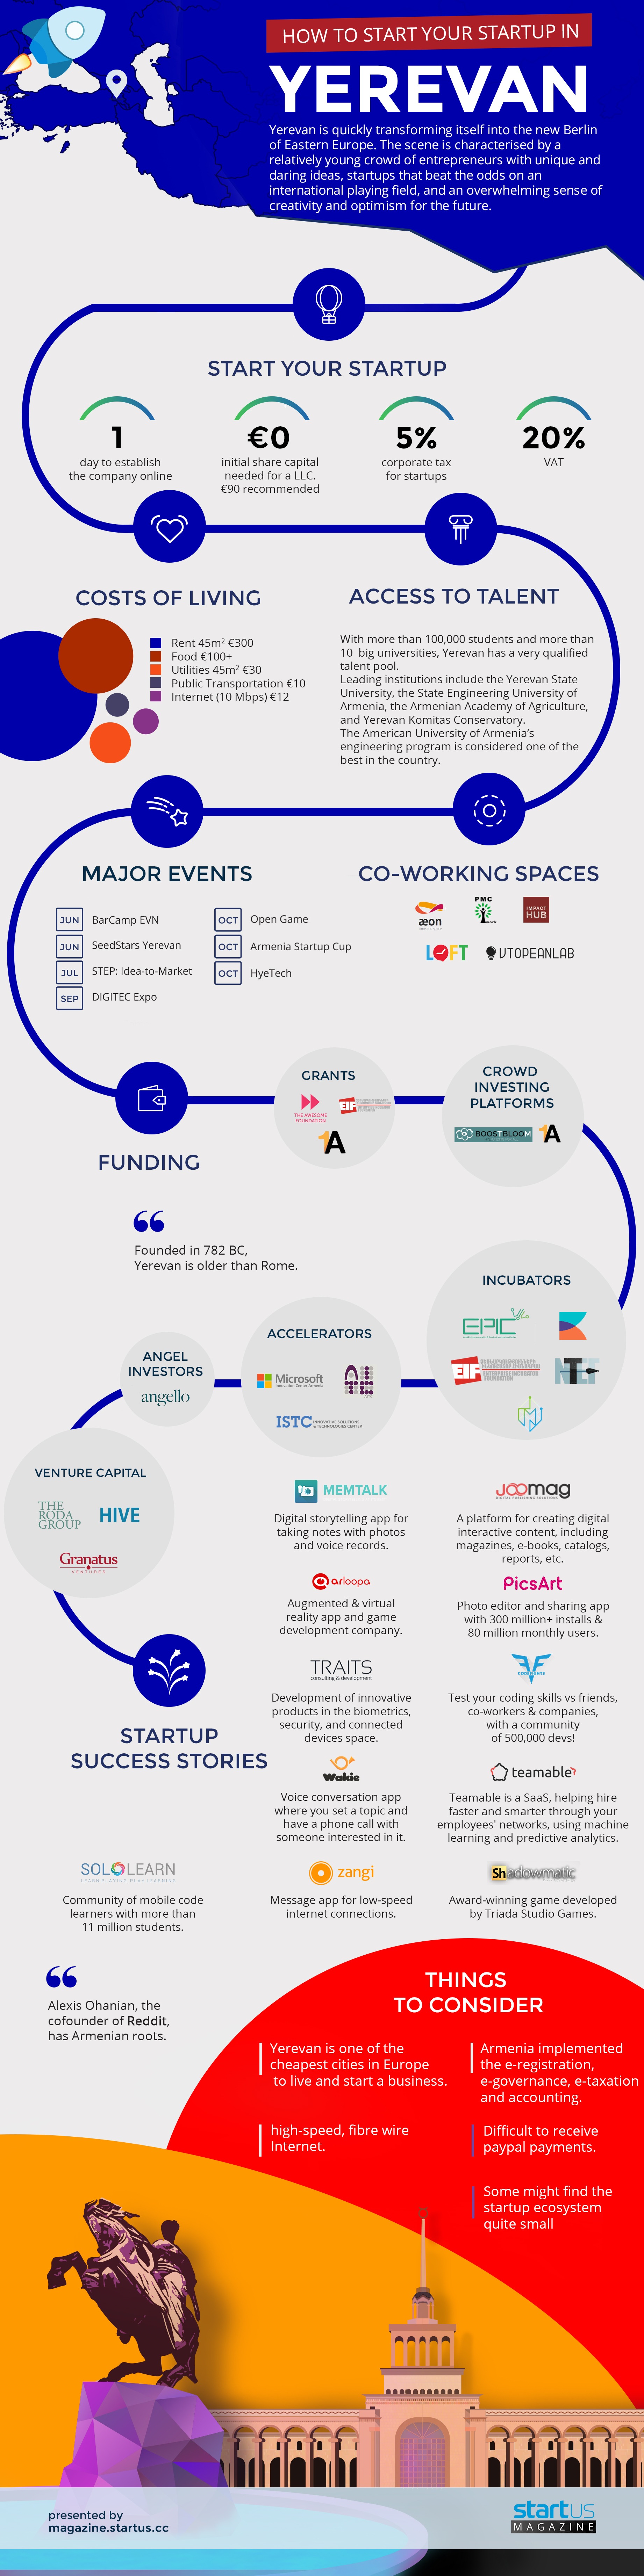 Infographic: How To Start A Startup In Yerevan